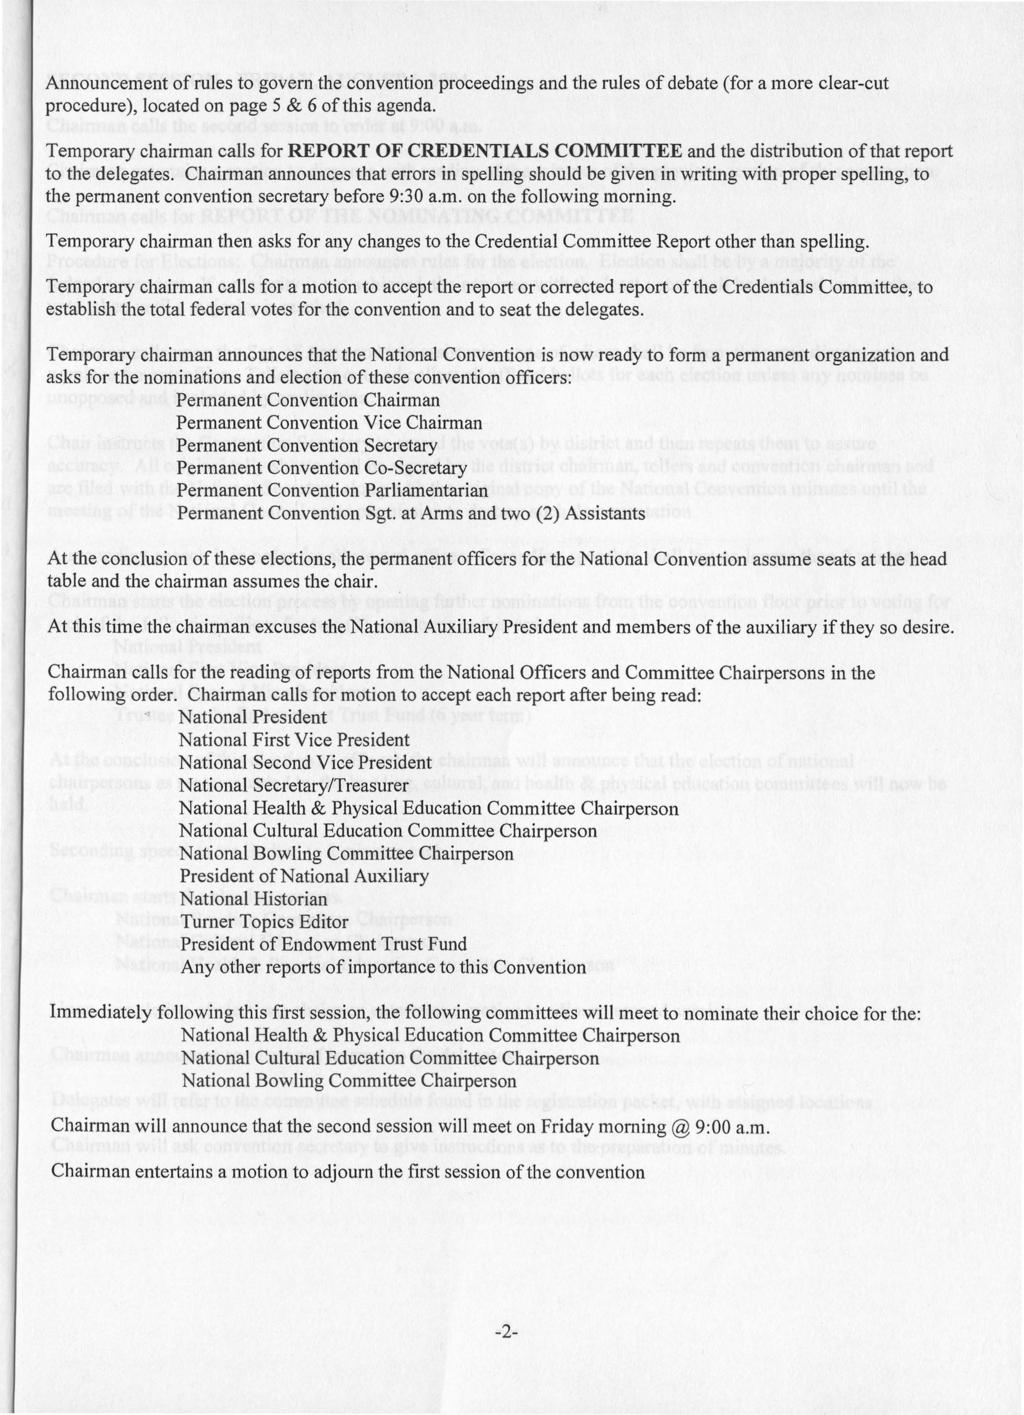 Announcement of rules to govern the convention proceedings and the rules of debate (for a more clear-cut procedure), located on page 5 & 6 of this agenda.